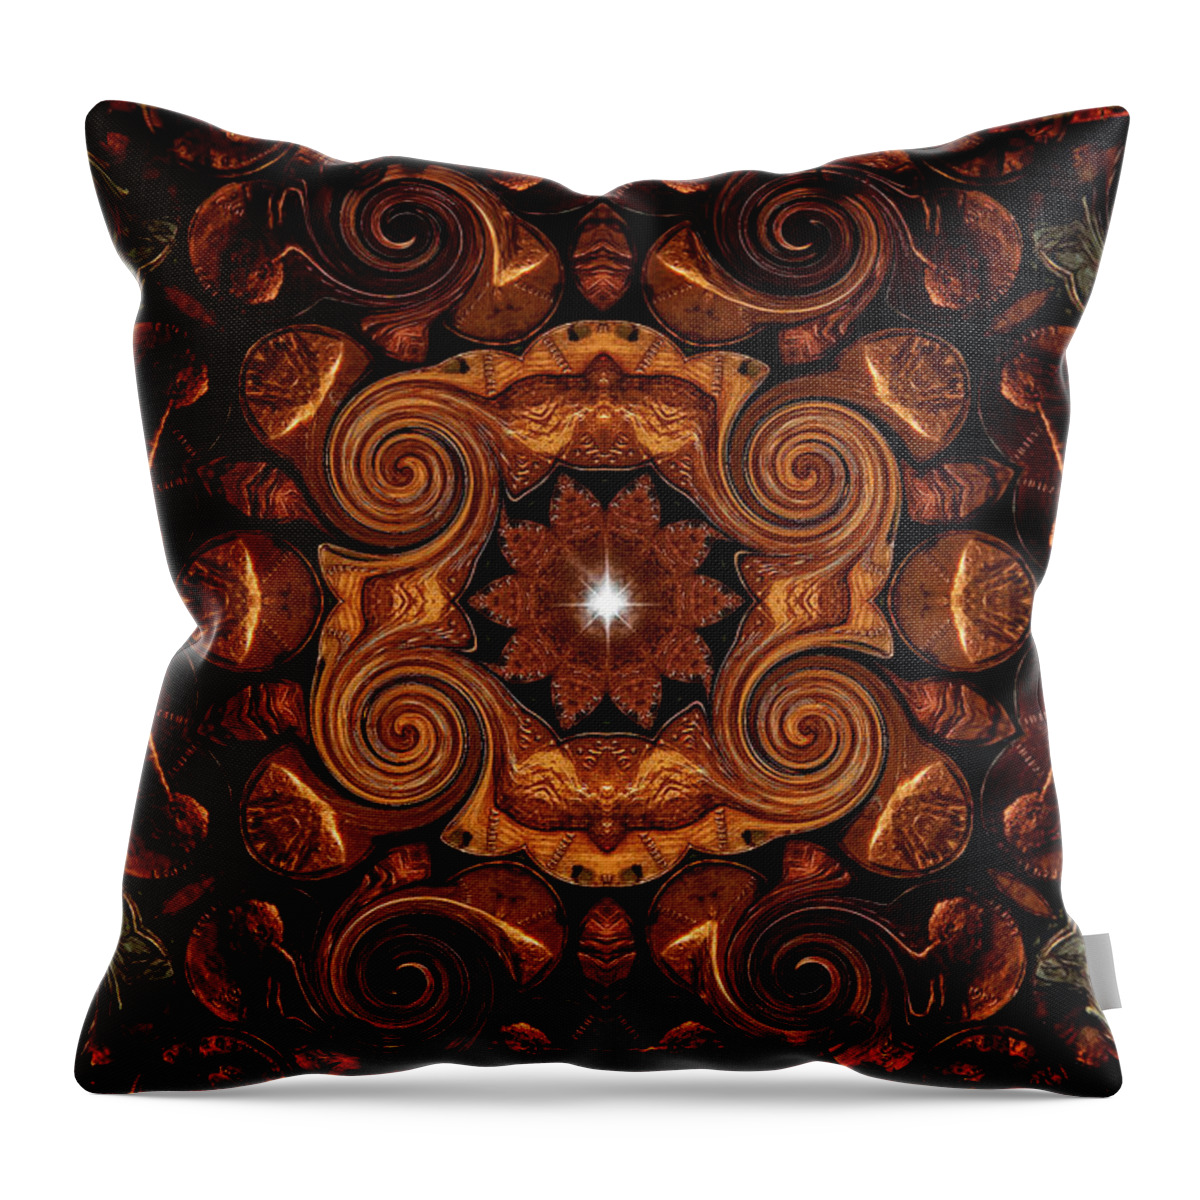 Pennies Throw Pillow featuring the photograph Pennies From Heaven by Michael Damiani